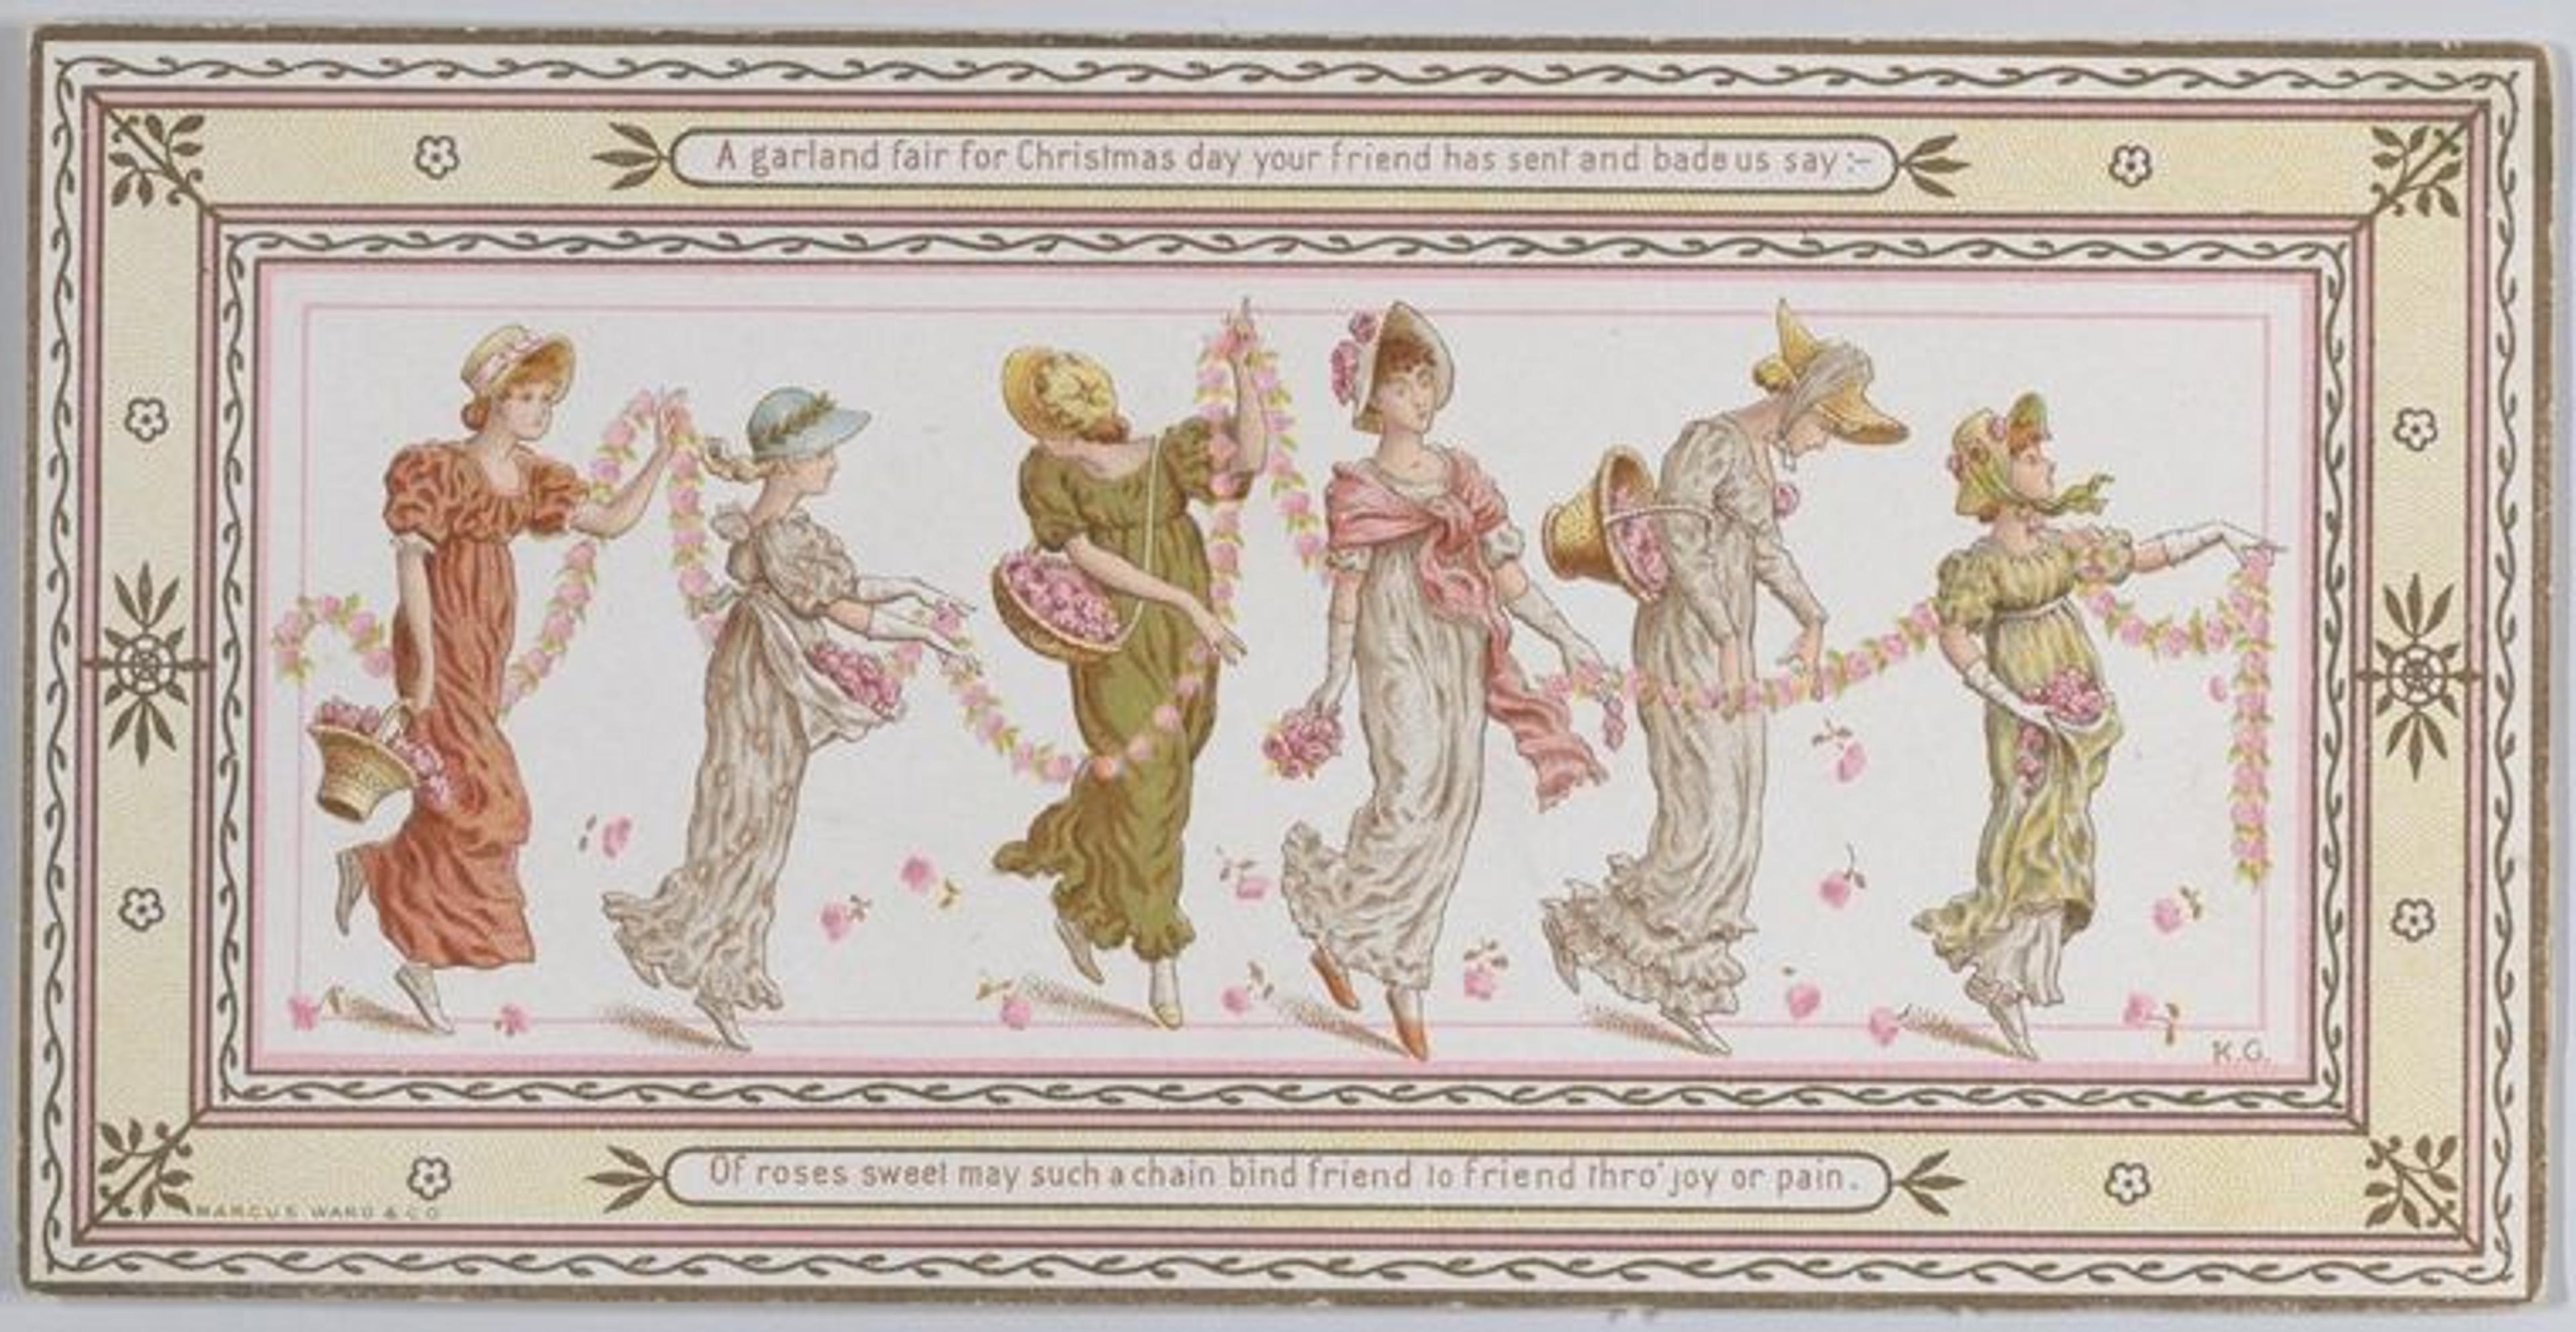 Kate Greenaway valentine featuring young women processing together while holding baskets of overflowing flowers